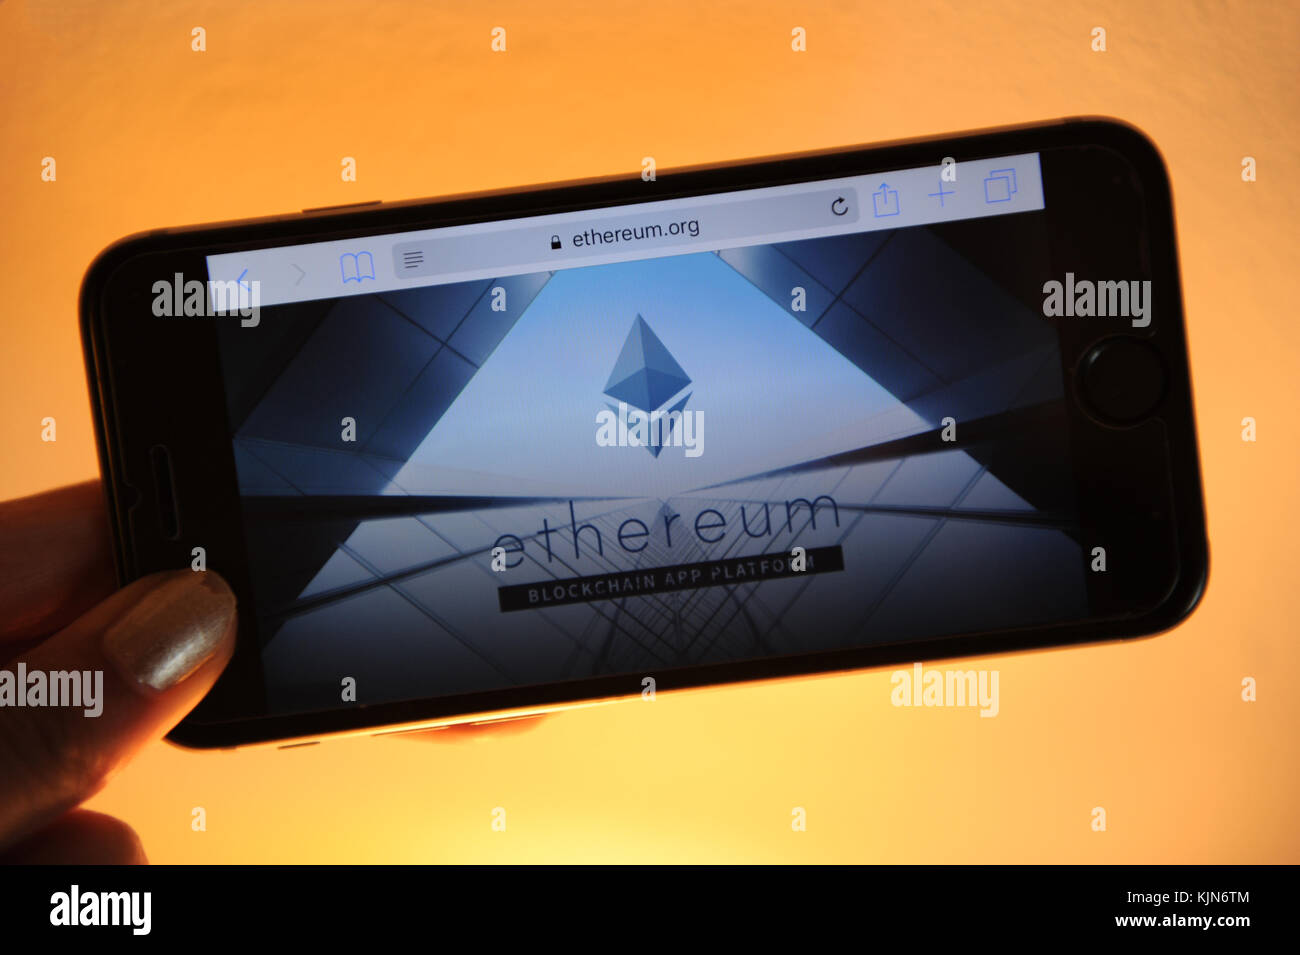 The Ethereum website on a phone Stock Photo